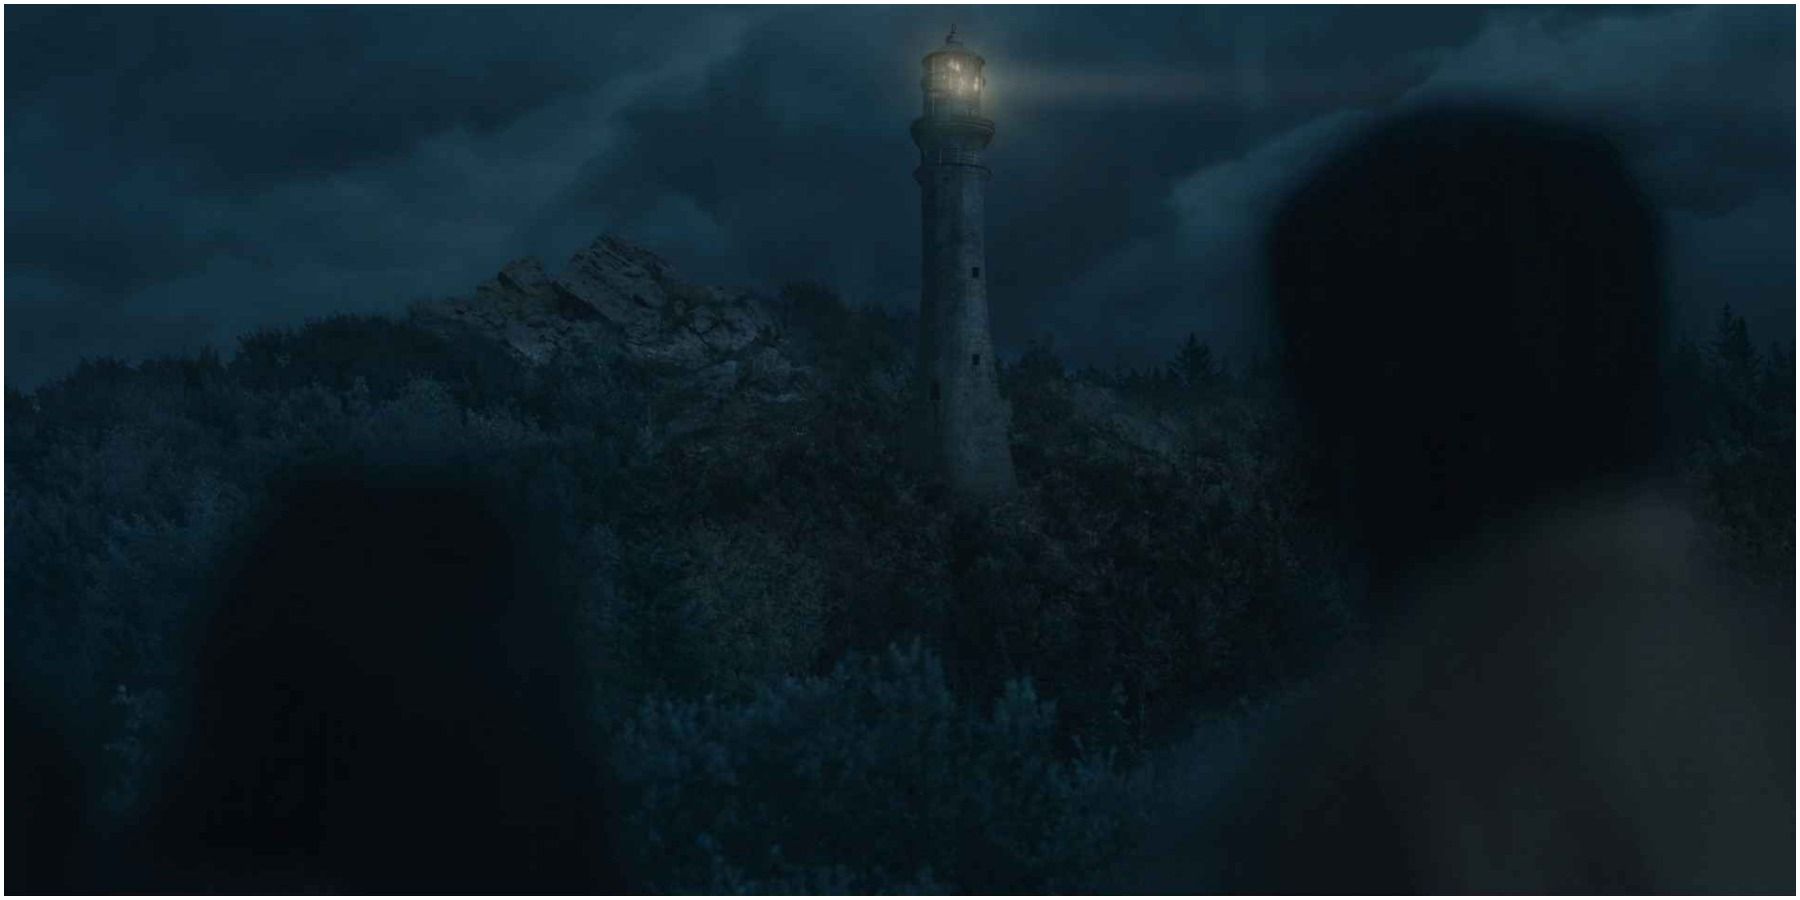 Boyd and Sara discover the lighthouse in From